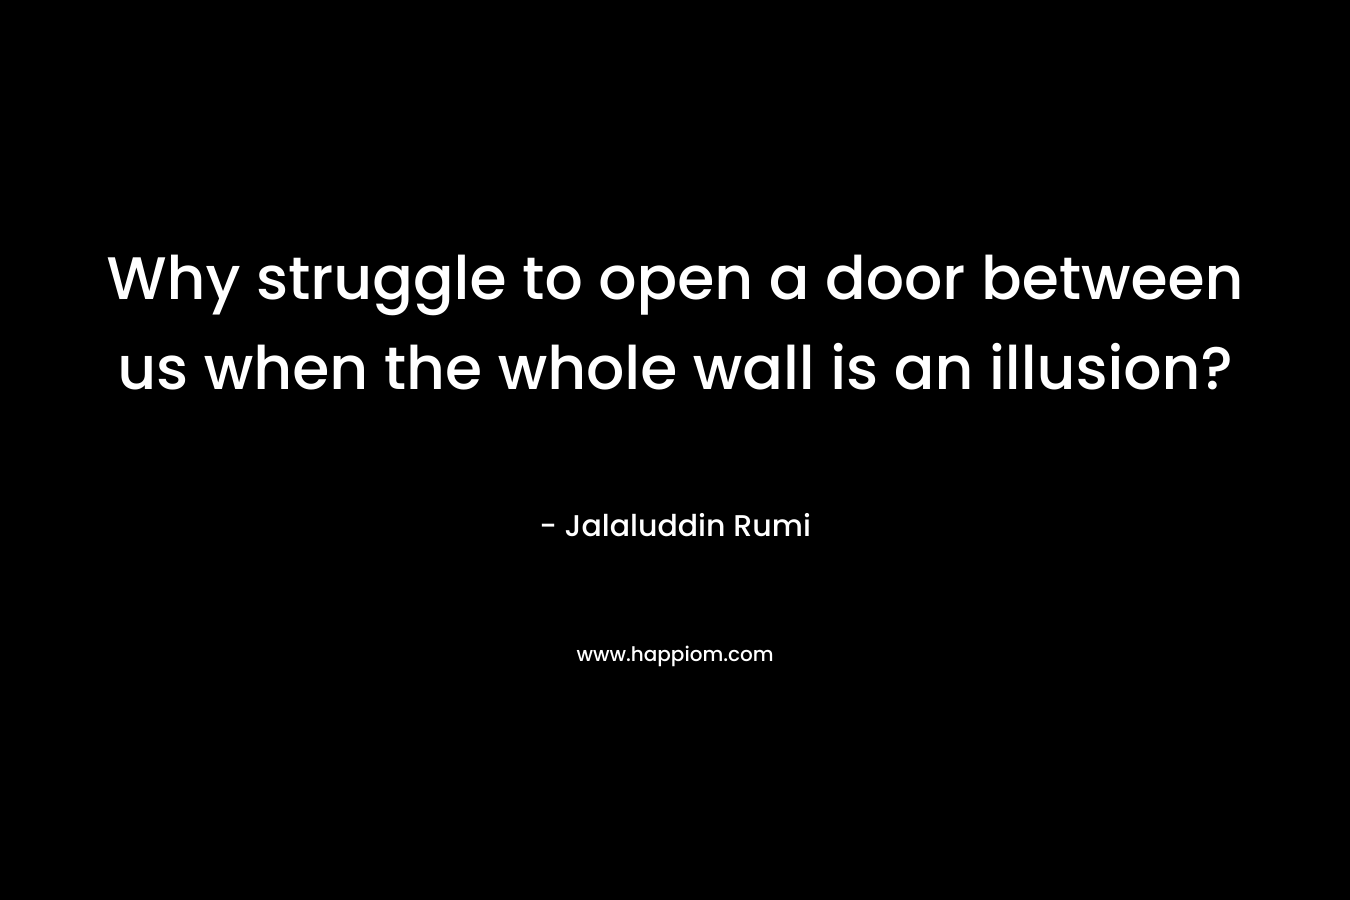 Why struggle to open a door between us when the whole wall is an illusion? – Jalaluddin Rumi